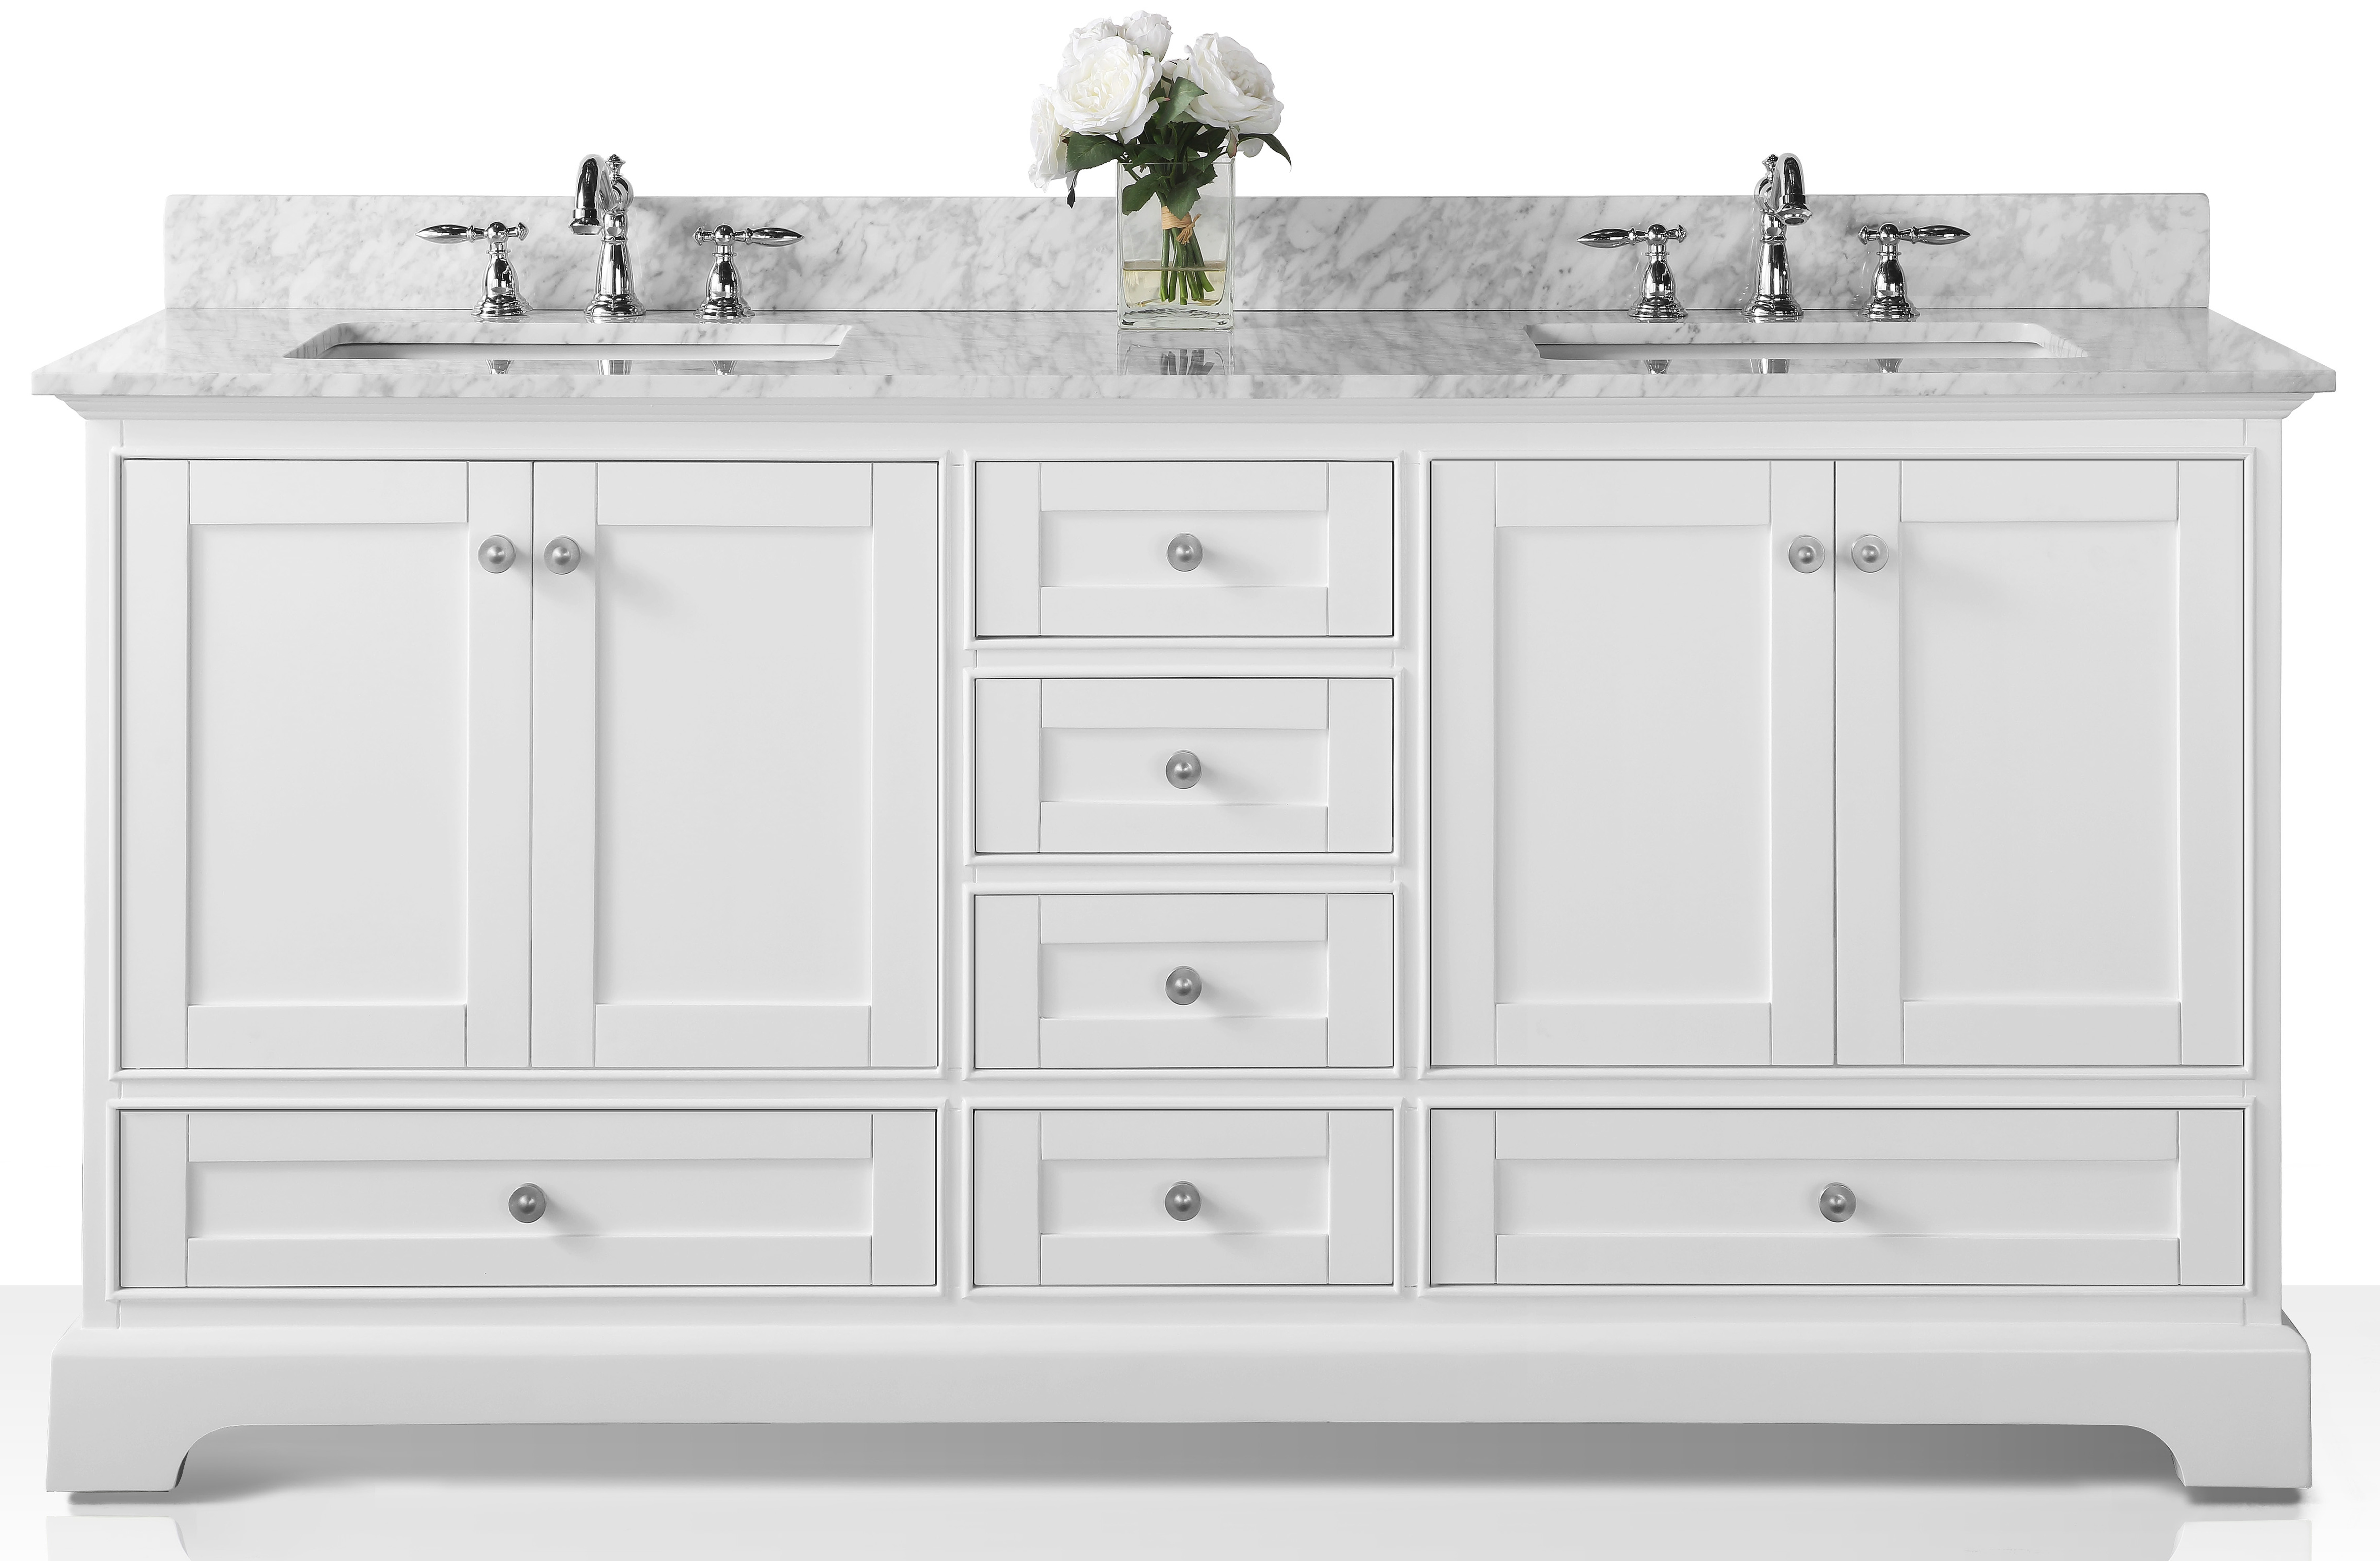 72" Bath Vanity Set in White with Italian Carrara White Marble Vanity top and White Undermount Basin with Top and Mirror Options